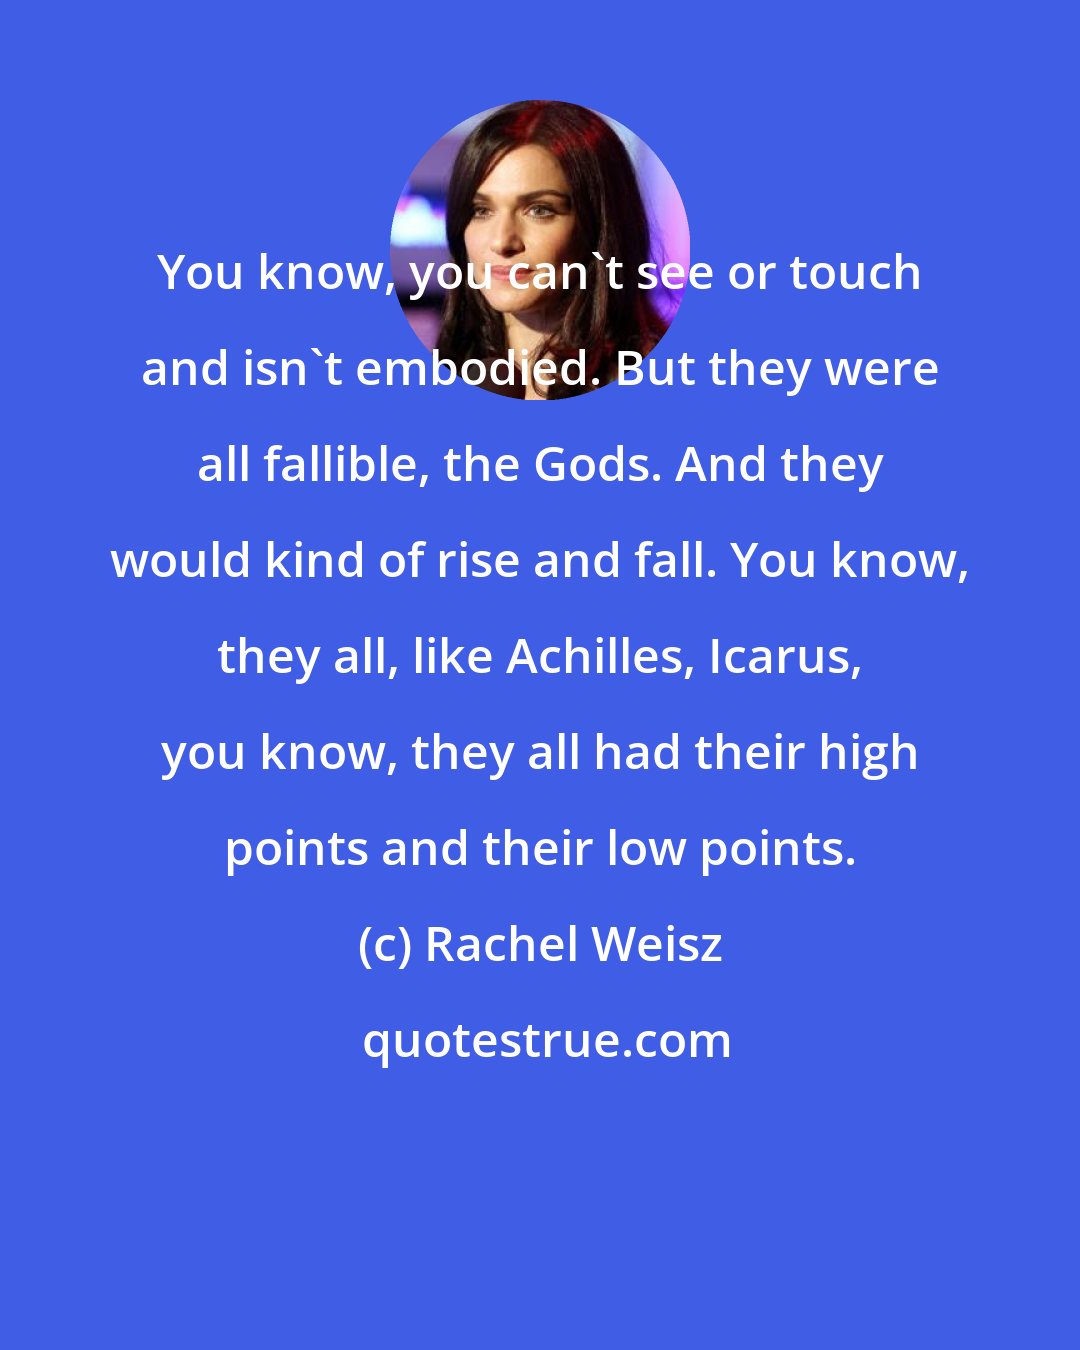 Rachel Weisz: You know, you can't see or touch and isn't embodied. But they were all fallible, the Gods. And they would kind of rise and fall. You know, they all, like Achilles, Icarus, you know, they all had their high points and their low points.